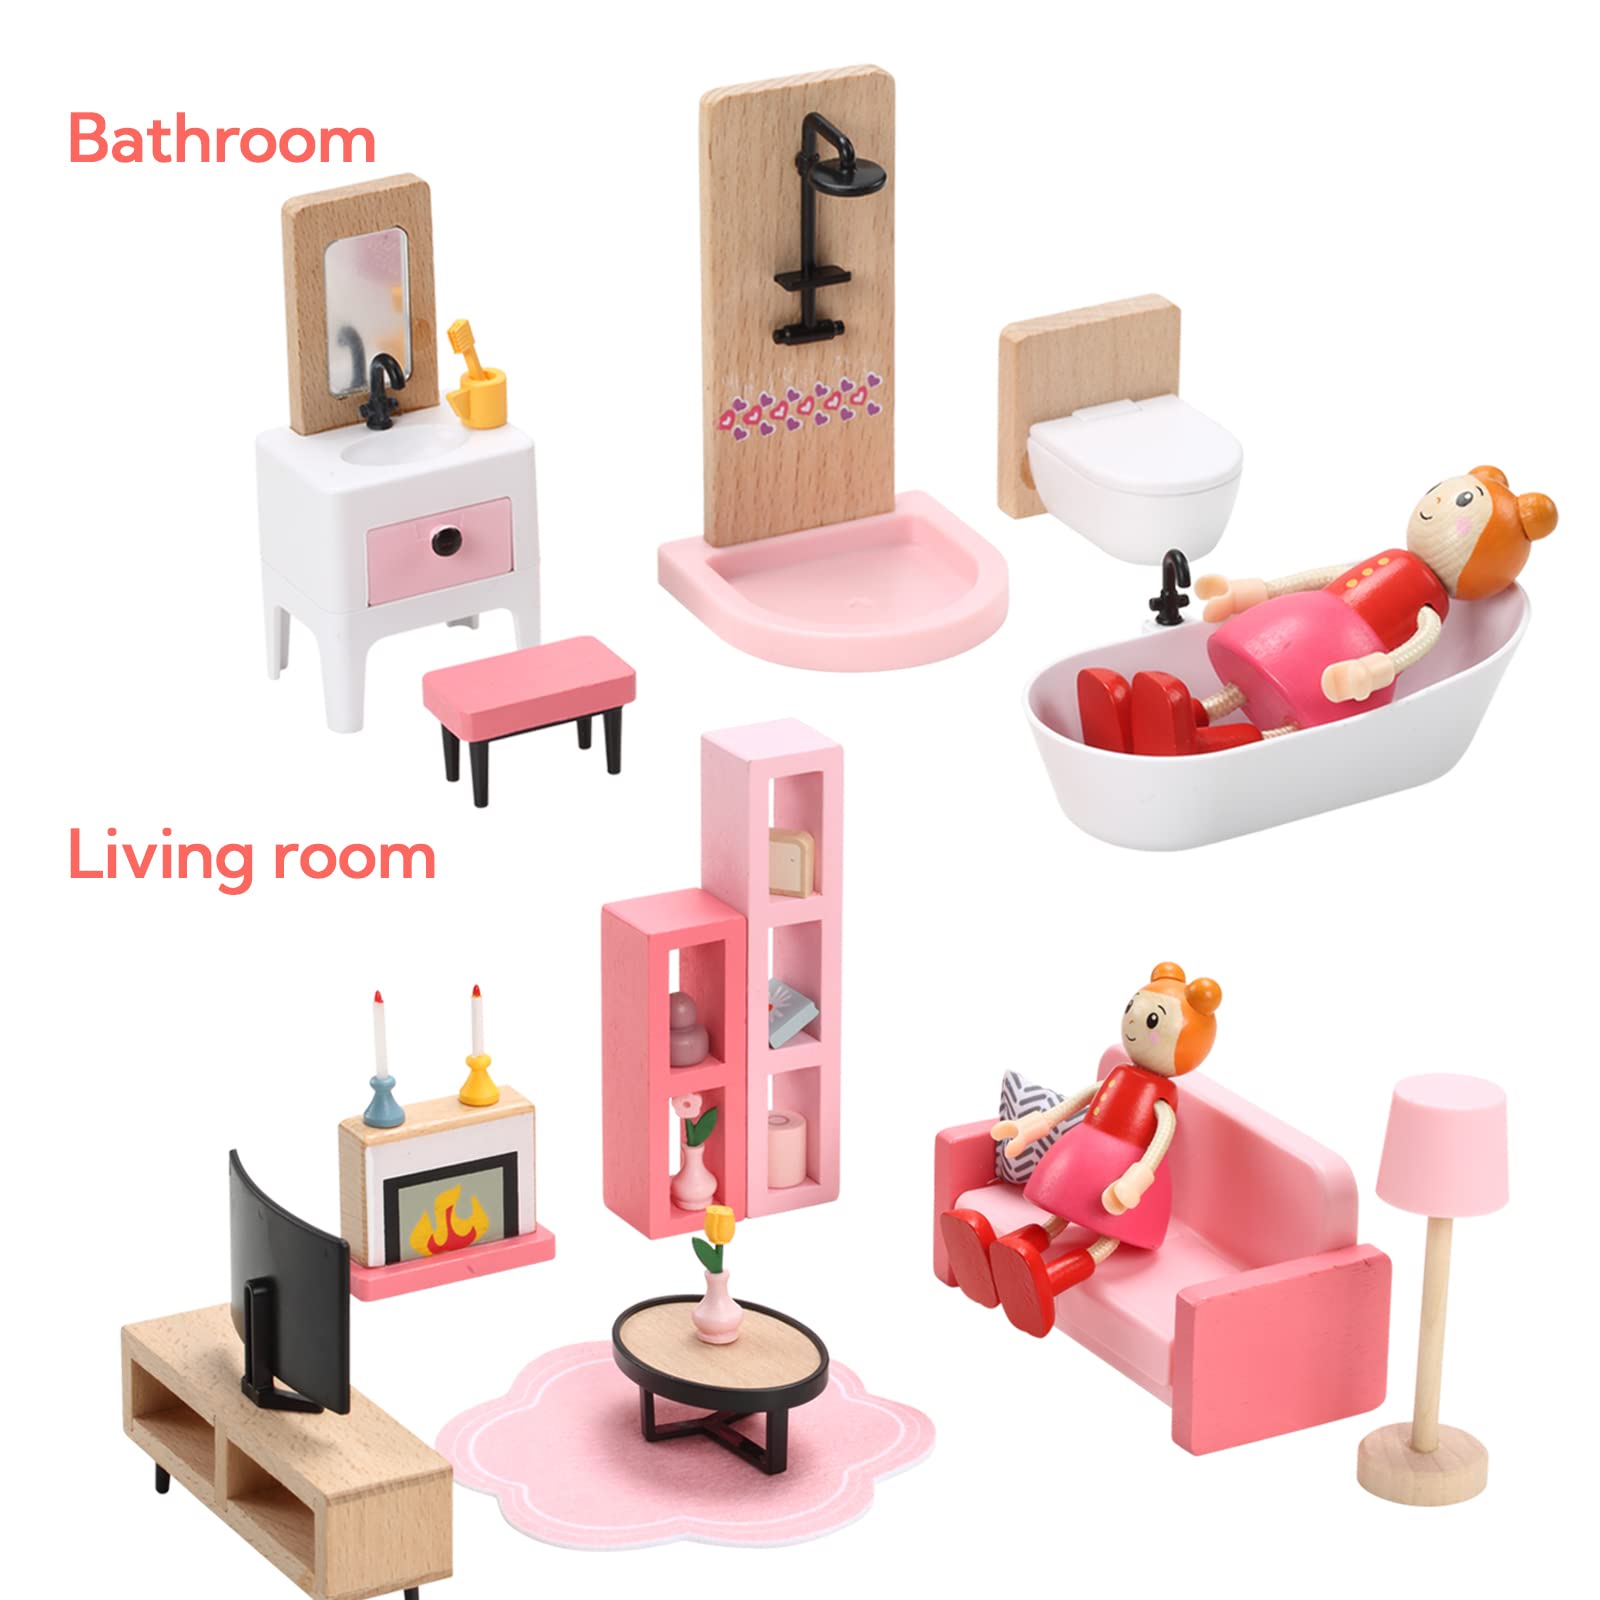 Wooden Dollhouse Furniture Set, 36pcs Furnitures with 4 Family Dolls, Dollhouse Accessories Pretend Play Furniture Toys for Boys Girls & Toddlers 3Y+, Pink